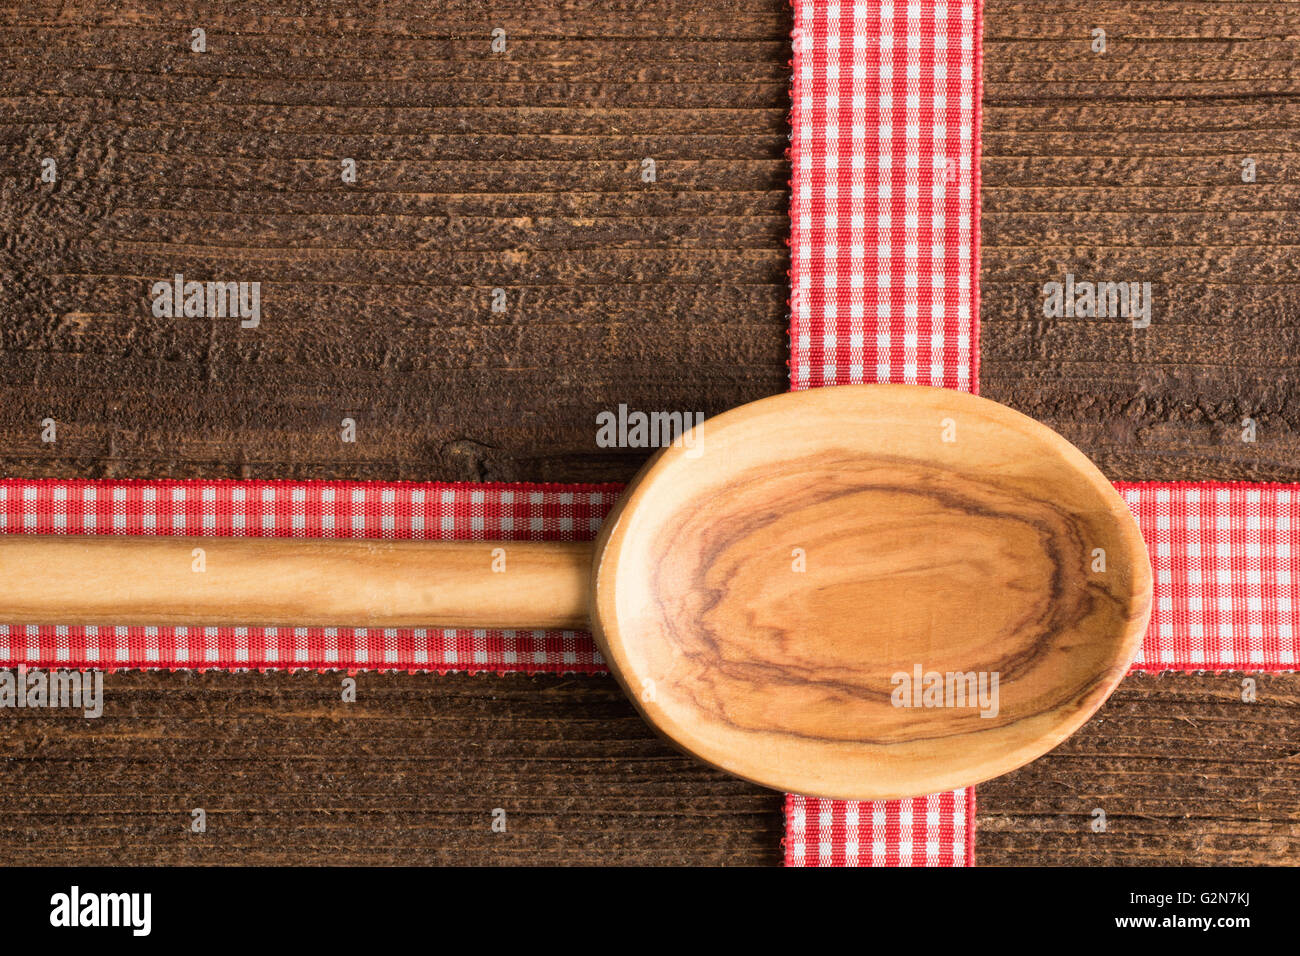 Rustic background with a wooden spoon on a rustic table Stock Photo